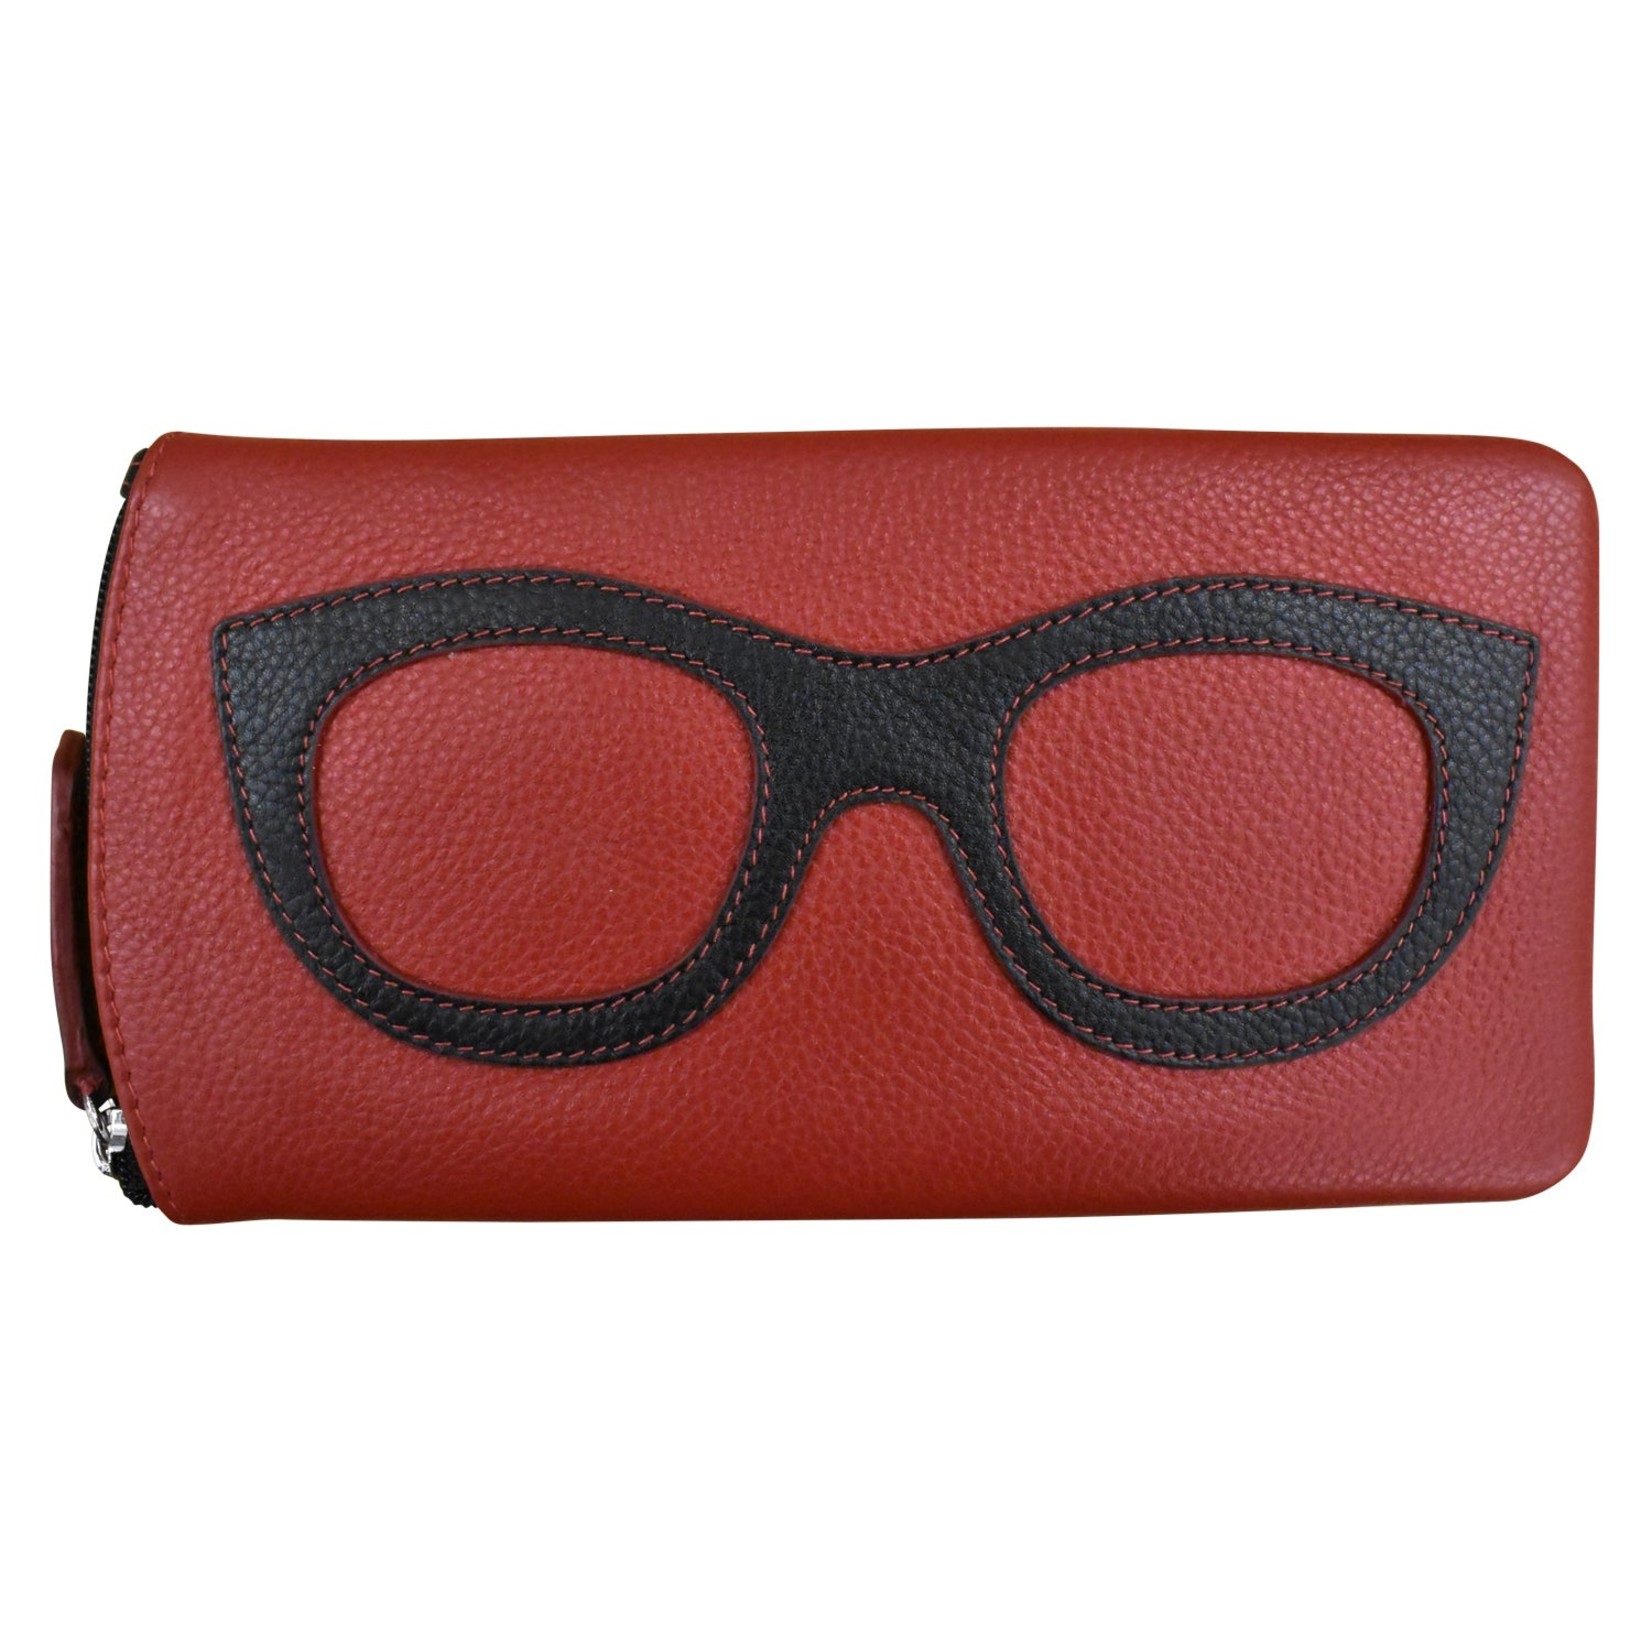 Leather Handbags and Accessories 6462 Red/Black - Leather Eyeglass Case